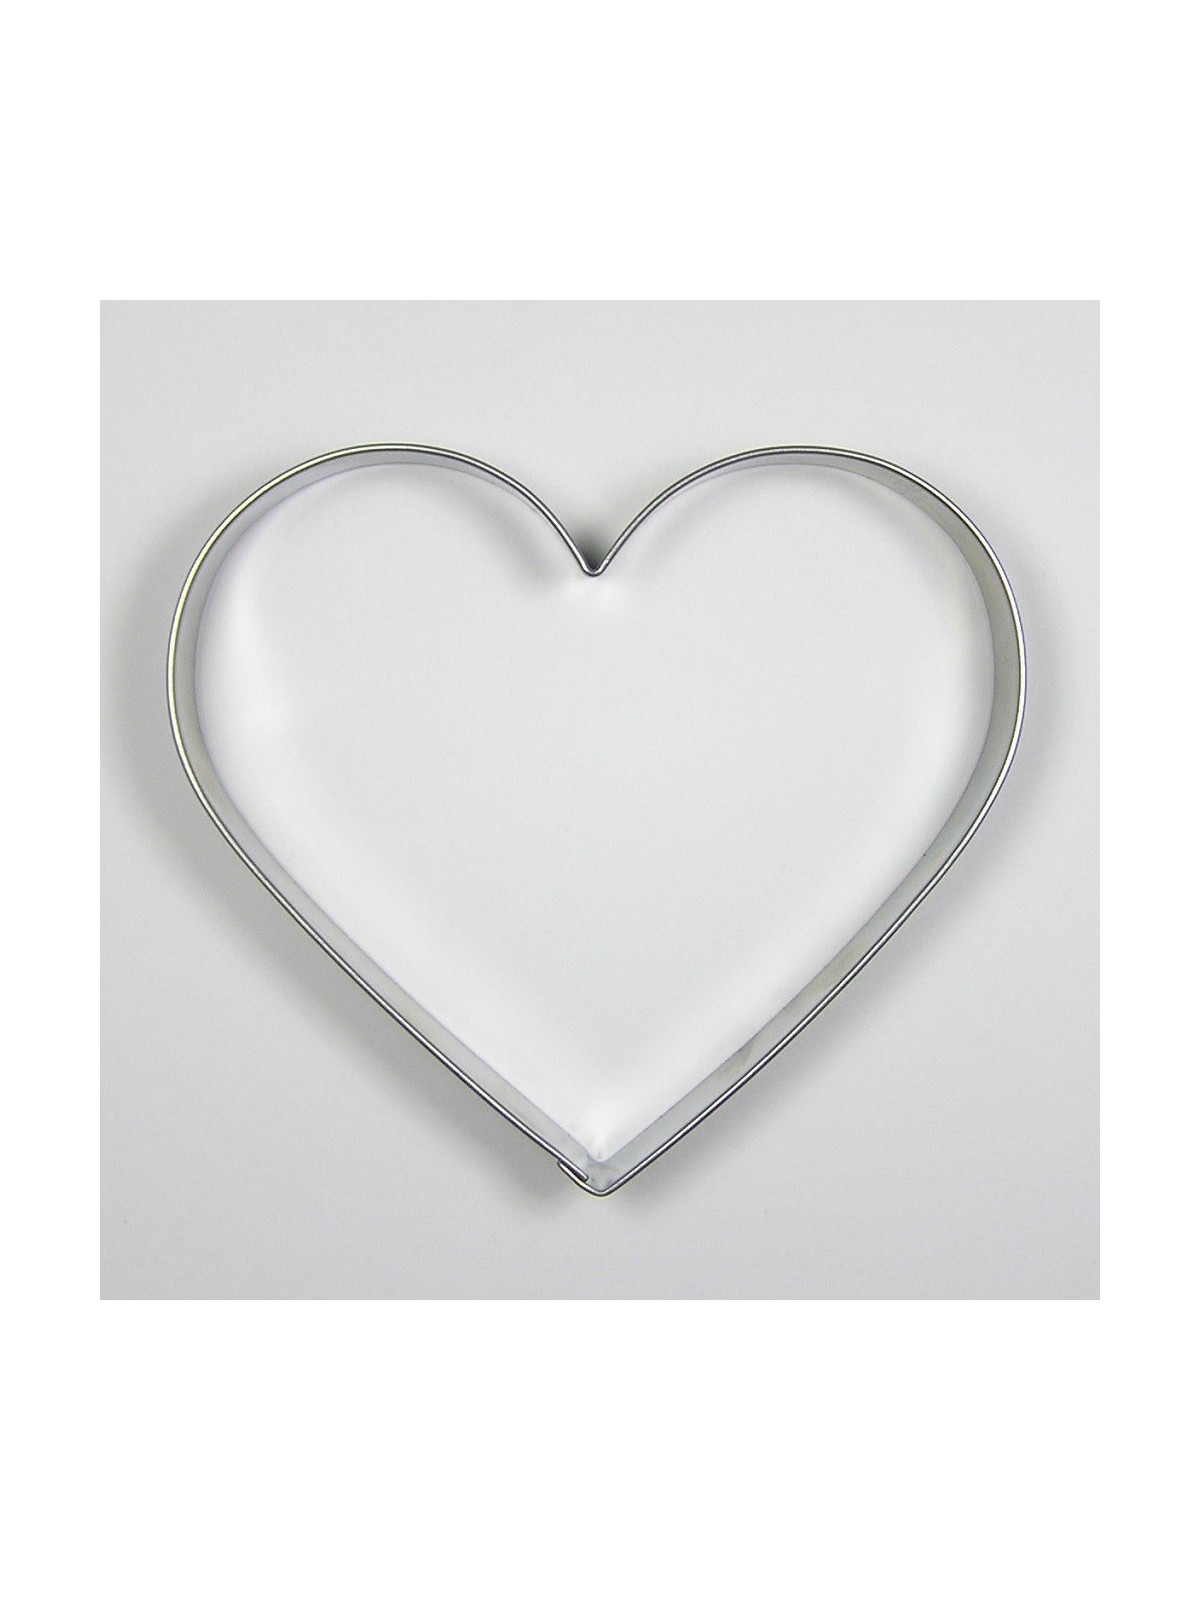 Stainless steel cookie cutter - heart 9.5 cm